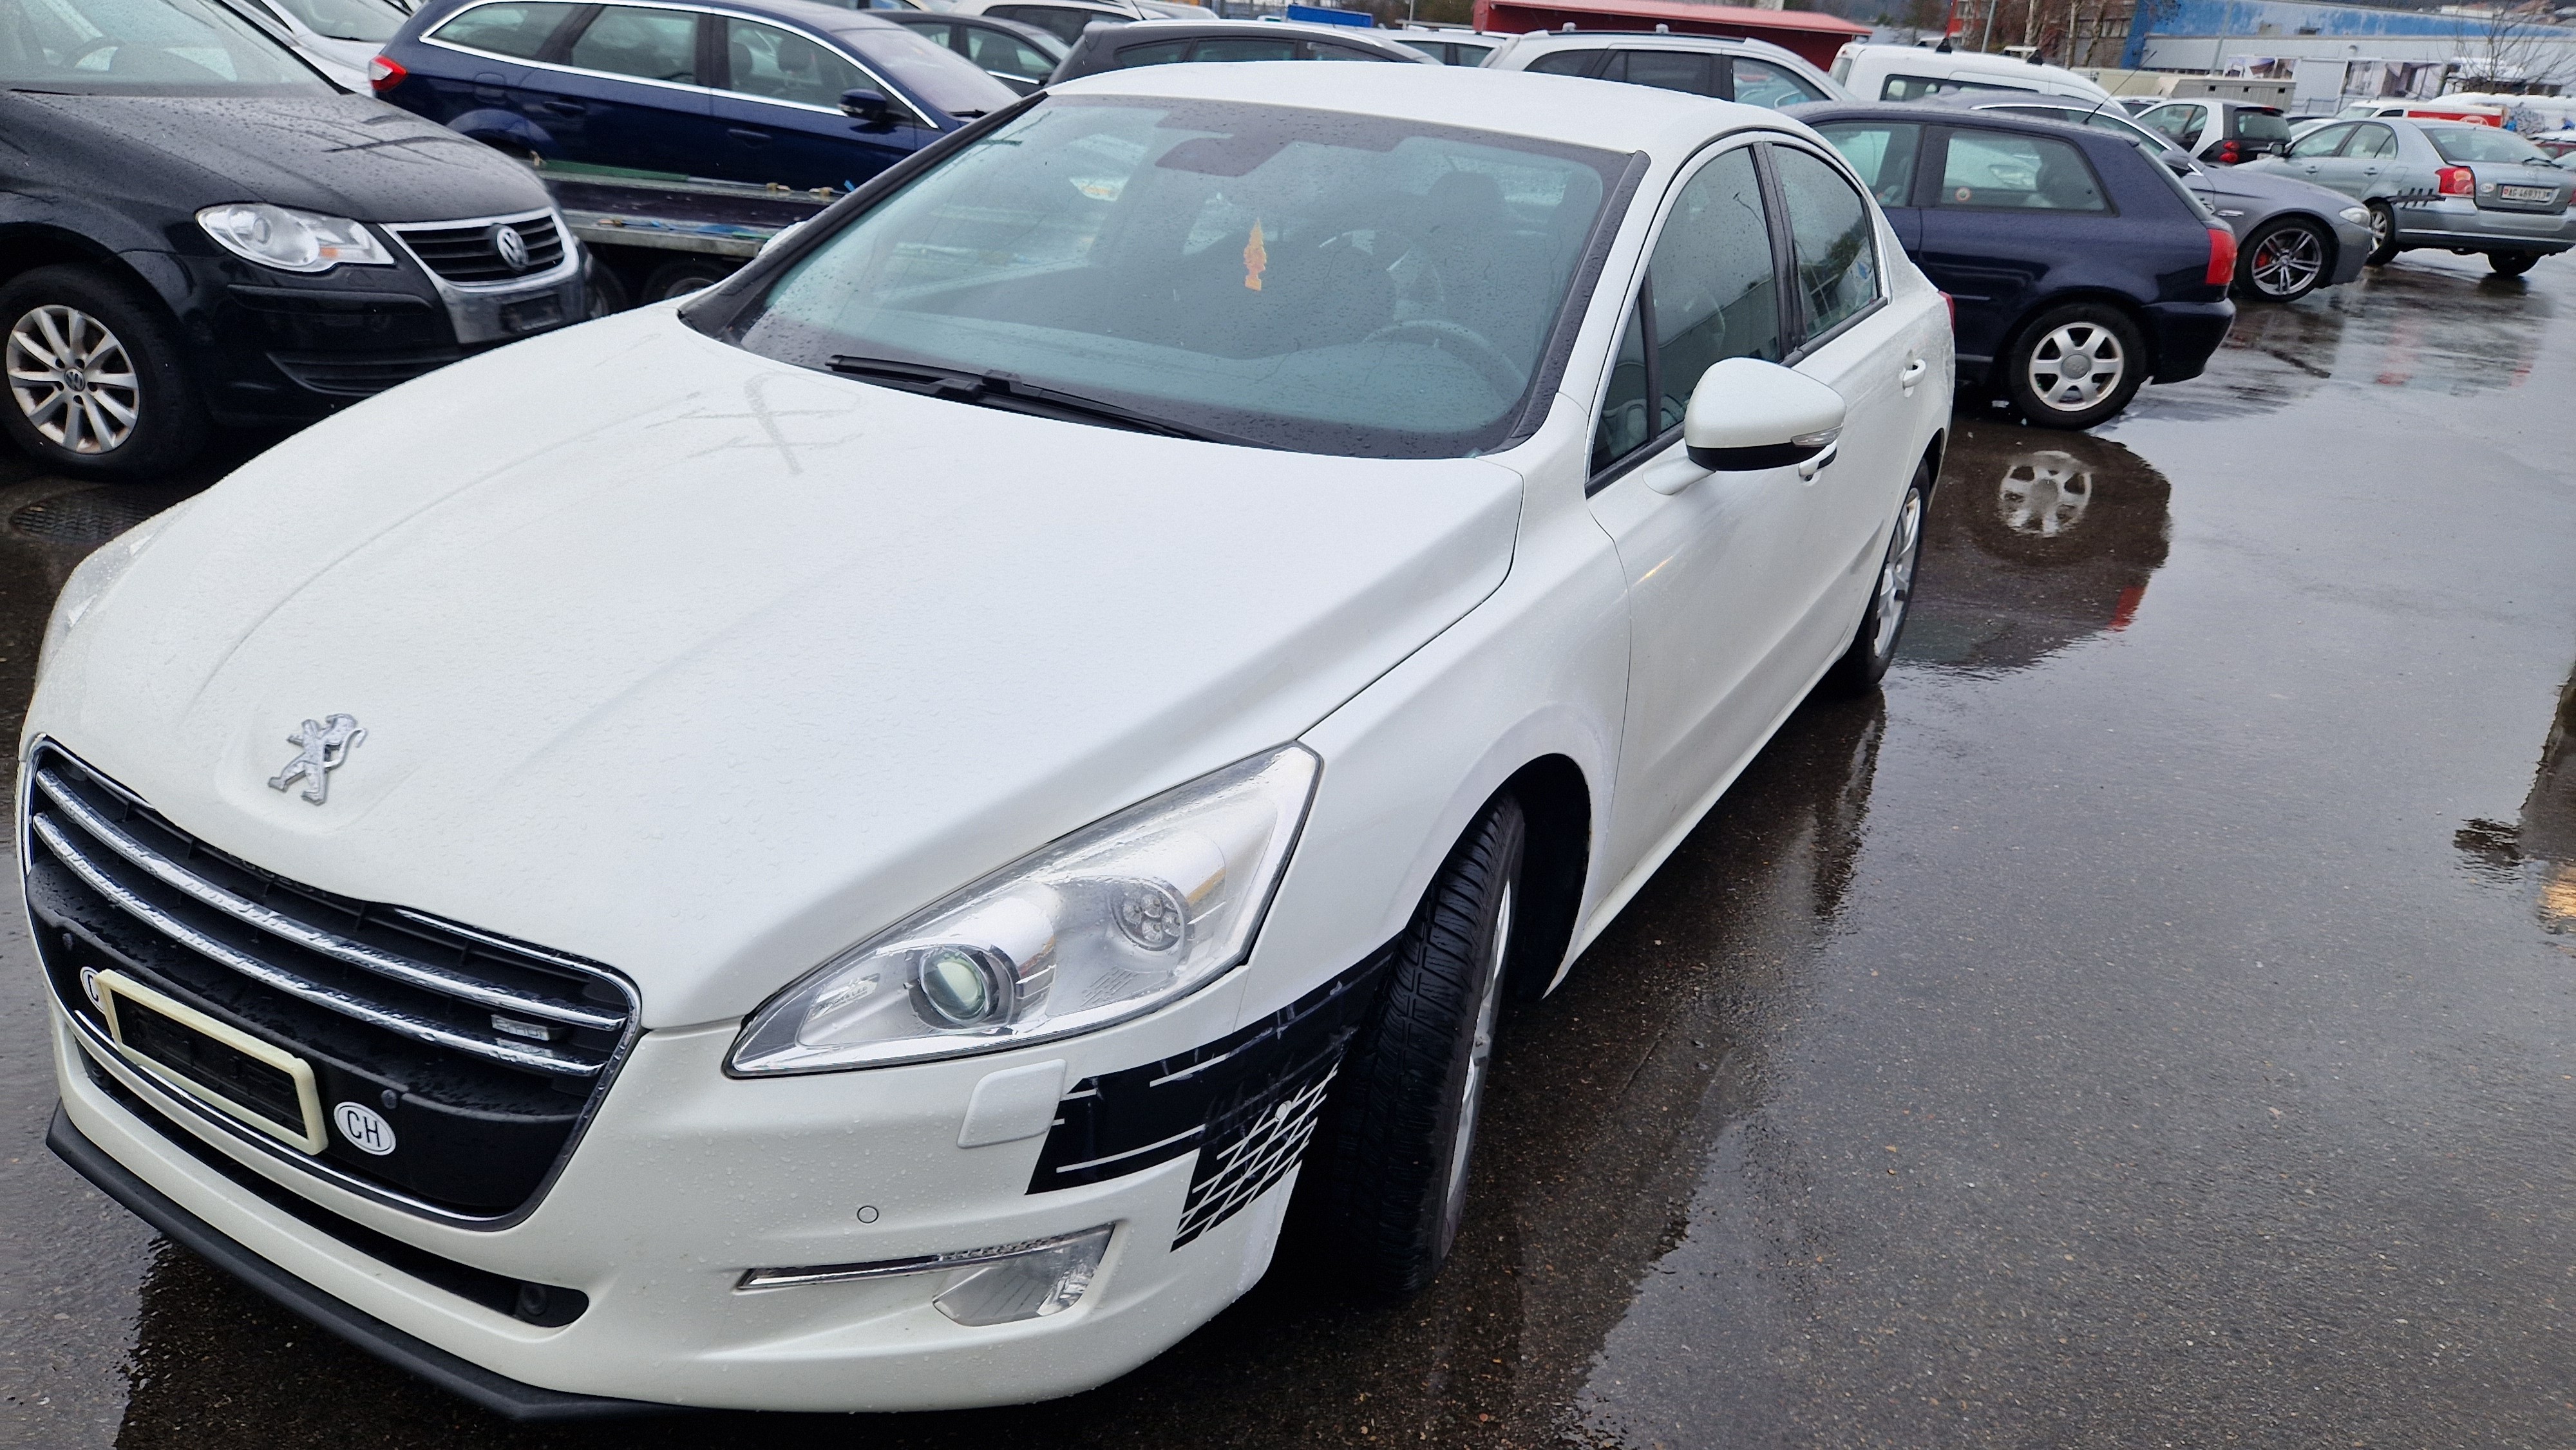 PEUGEOT 508 1.6 e-HDI Active EGS6